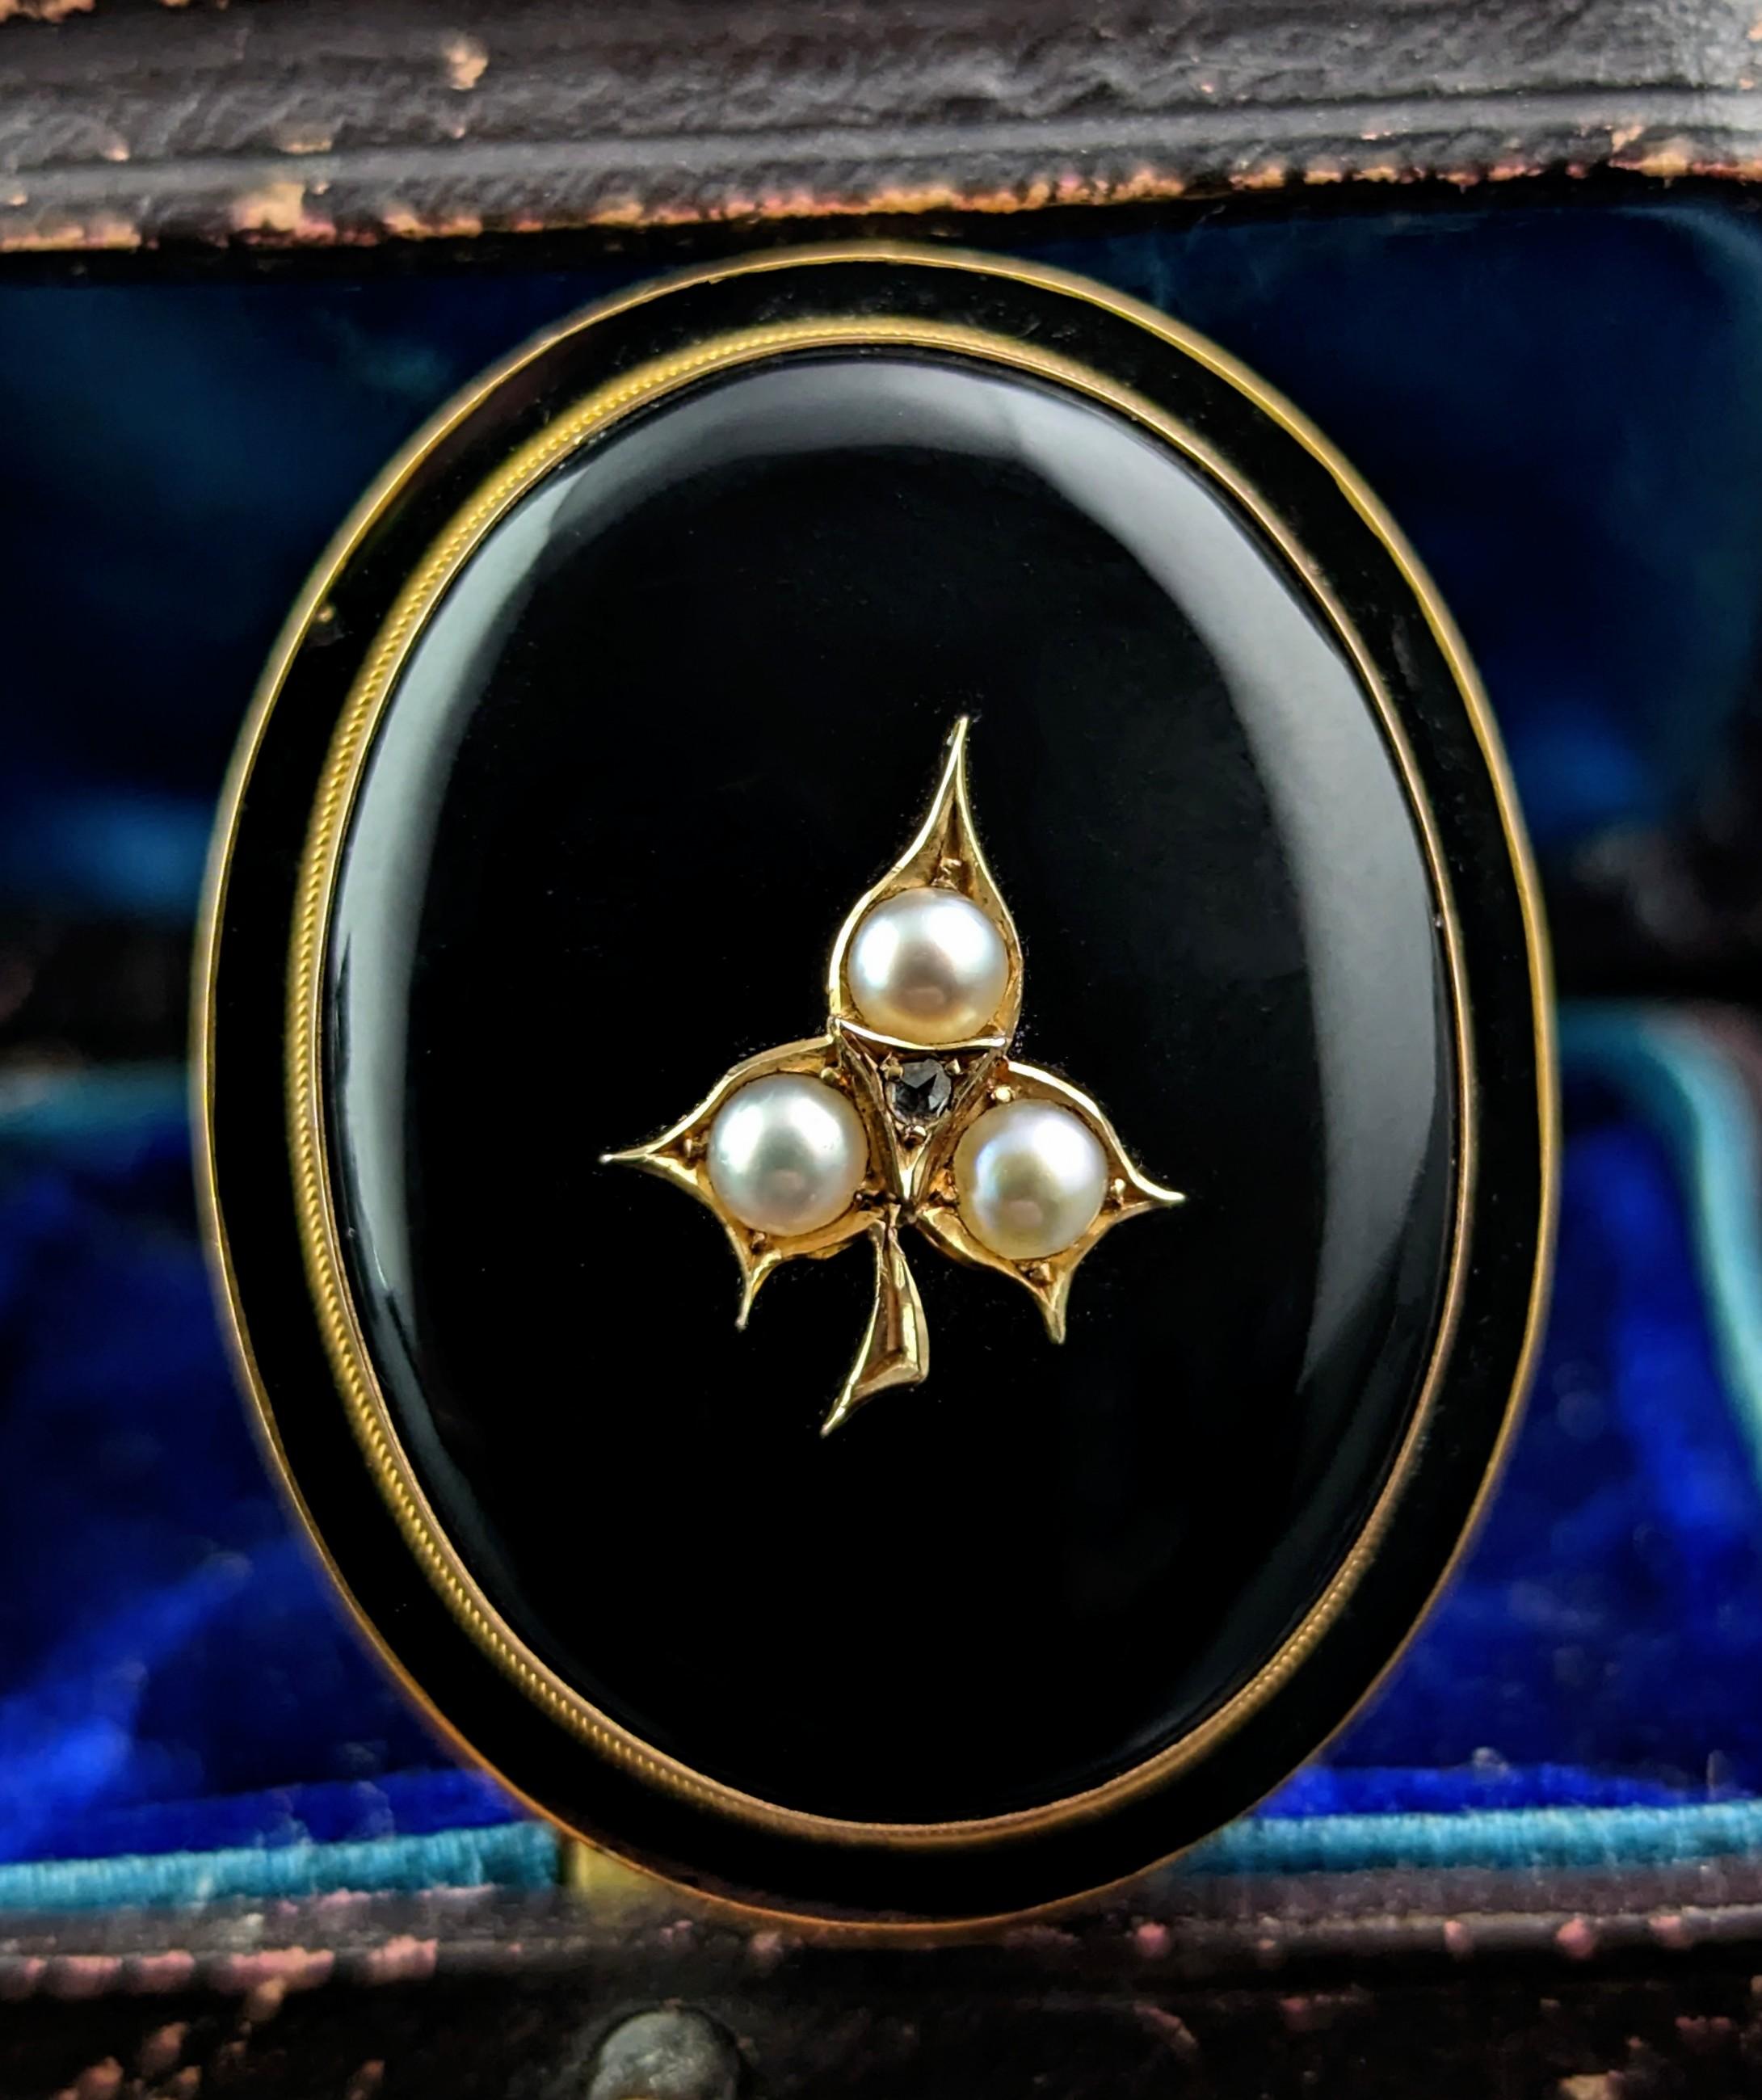 You can't help but be enchanted by this fine antique Mourning brooch.

It is crafted in rich 15ct gold with a large inky black Onyx cabochon to the front, this is mounted with a pretty ivy leaf set with creamy pearls and a diamond point to the